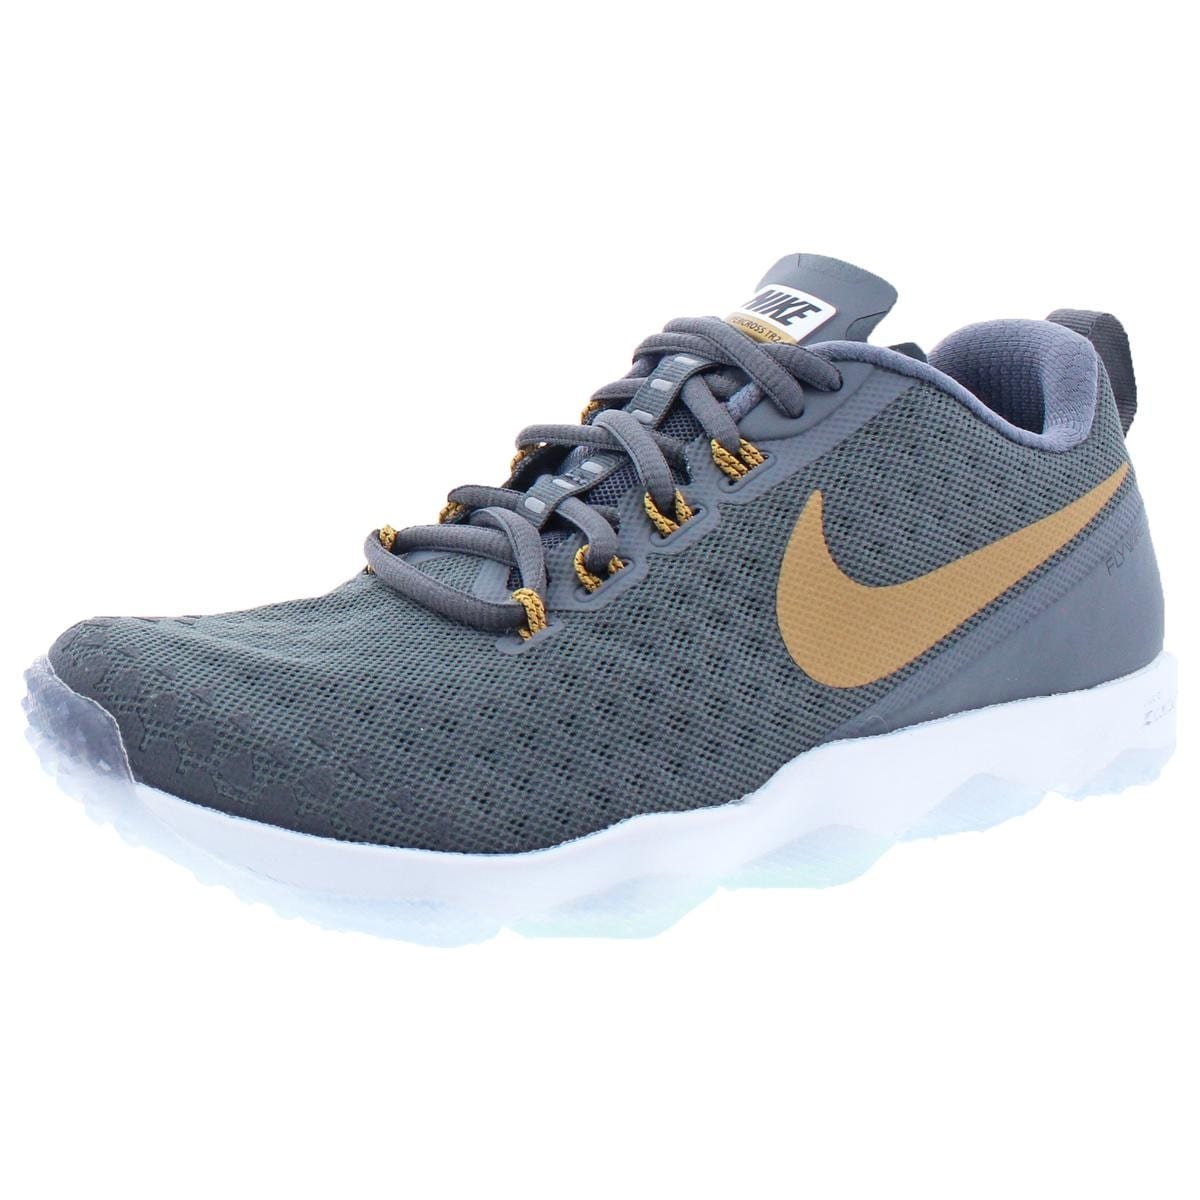 flywire nike running shoes